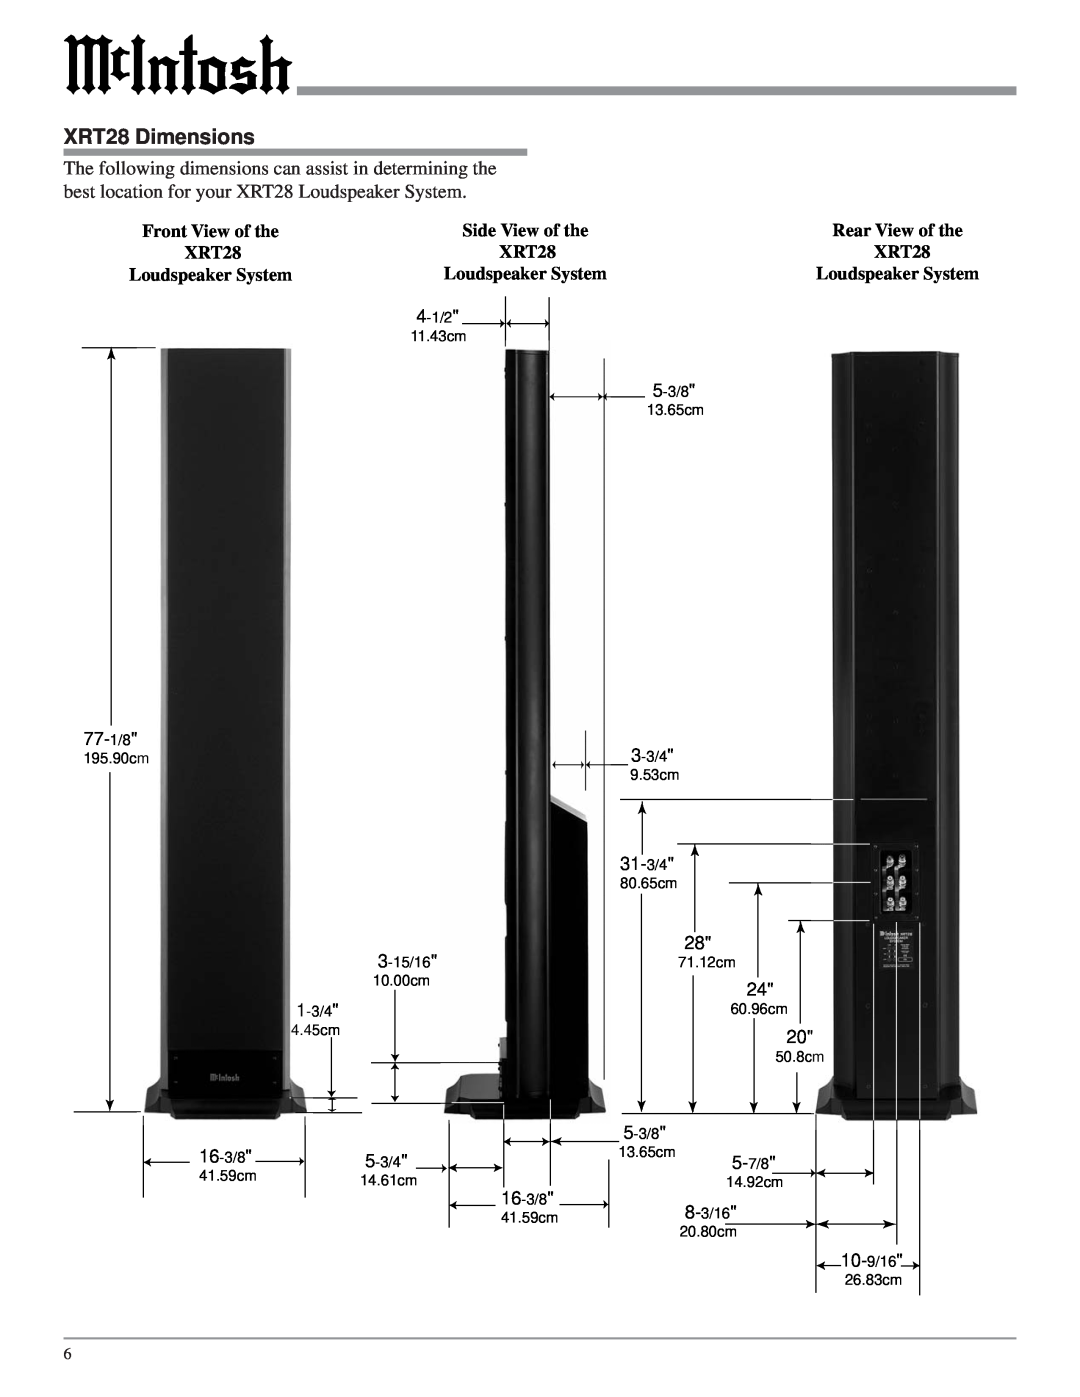 McIntosh XRT28 Dimensions, Front View of the XRT28 Loudspeaker System, 77-1/8, 31-3/4, 10-9/16, Side View of the 